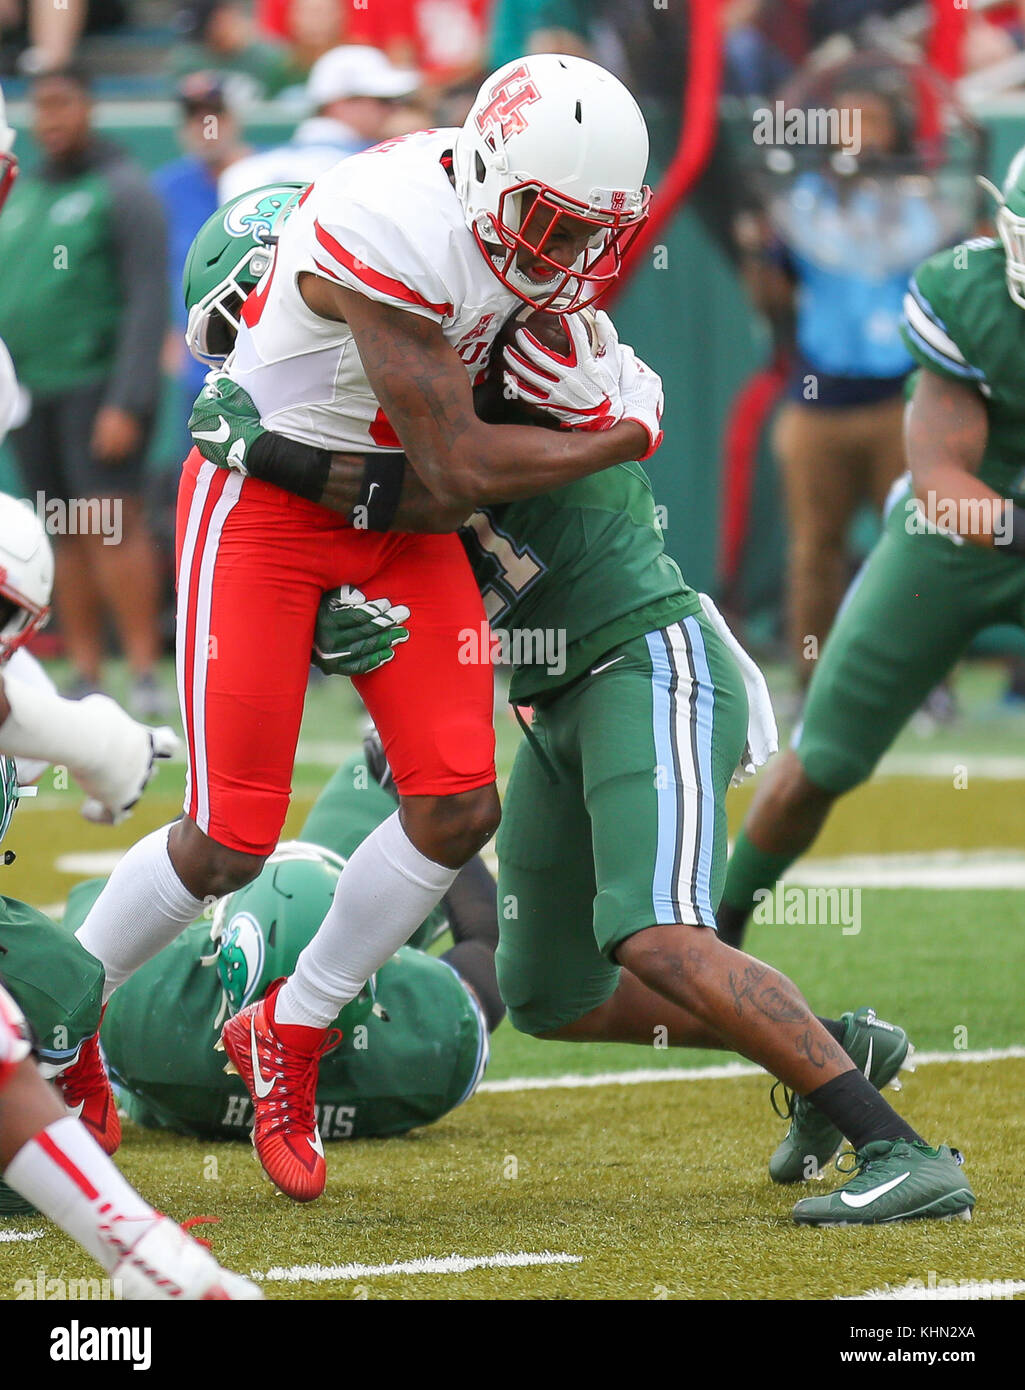 New Orleans, LA, USA. 18th Nov, 2017. Houston's John Leday #85 covers up the ball as he's tackled during the NCAA football game between the Tulane Green Wave and the Houston Cougars at Yulman Stadium in New Orleans, LA. Kyle Okita/CSM/Alamy Live News Stock Photo